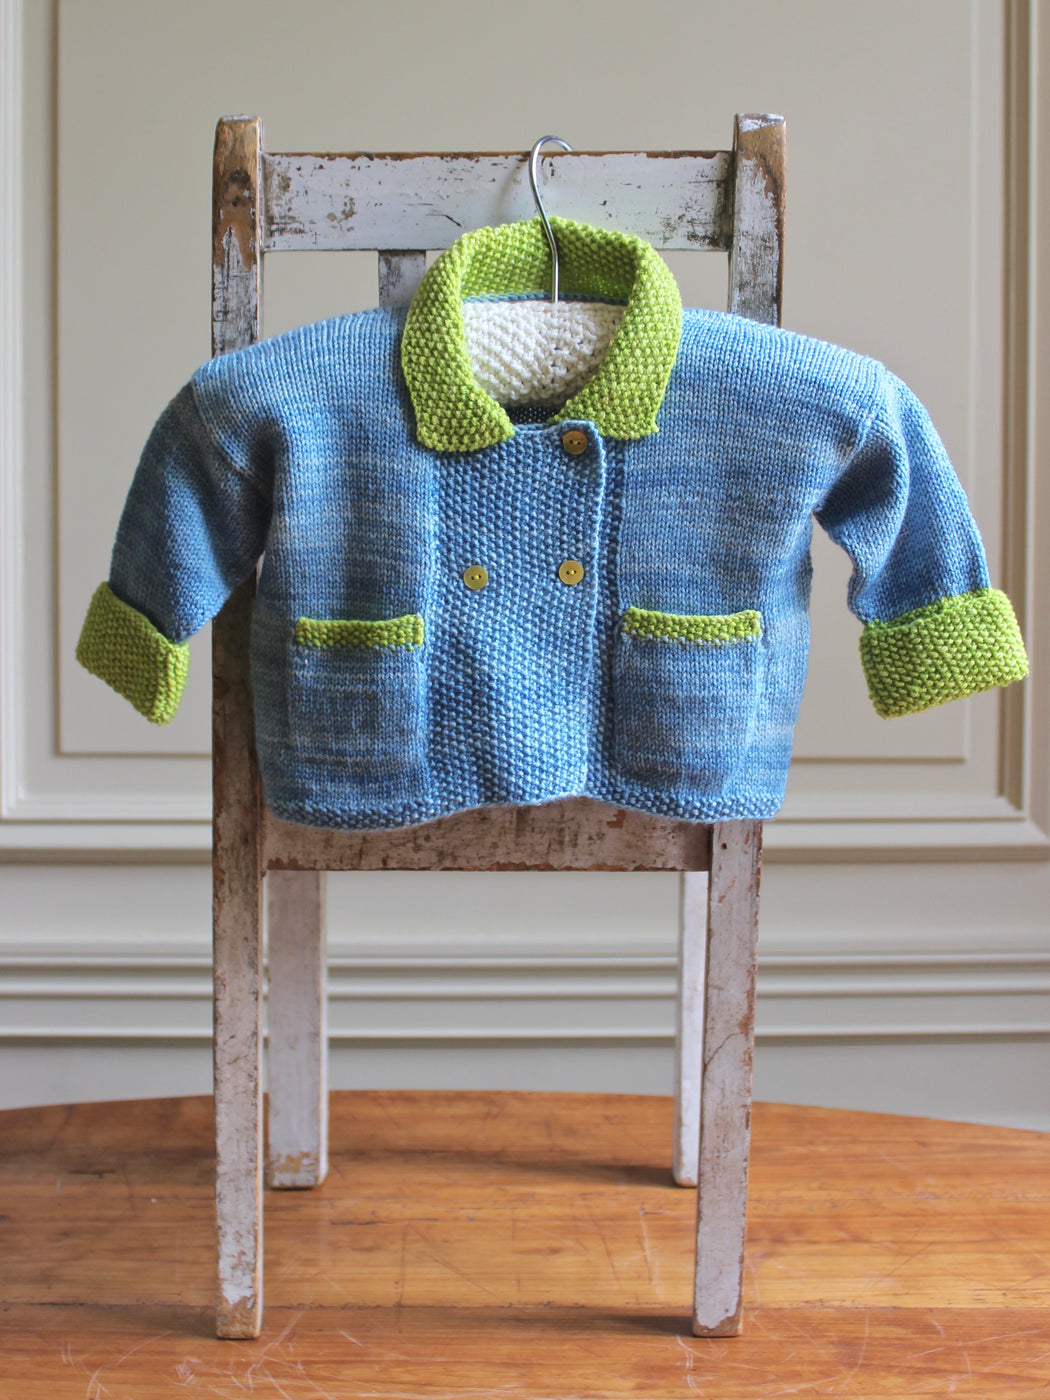 Aunt Debbie's Hand-Knit Baby Sweater (1 - 2 years)